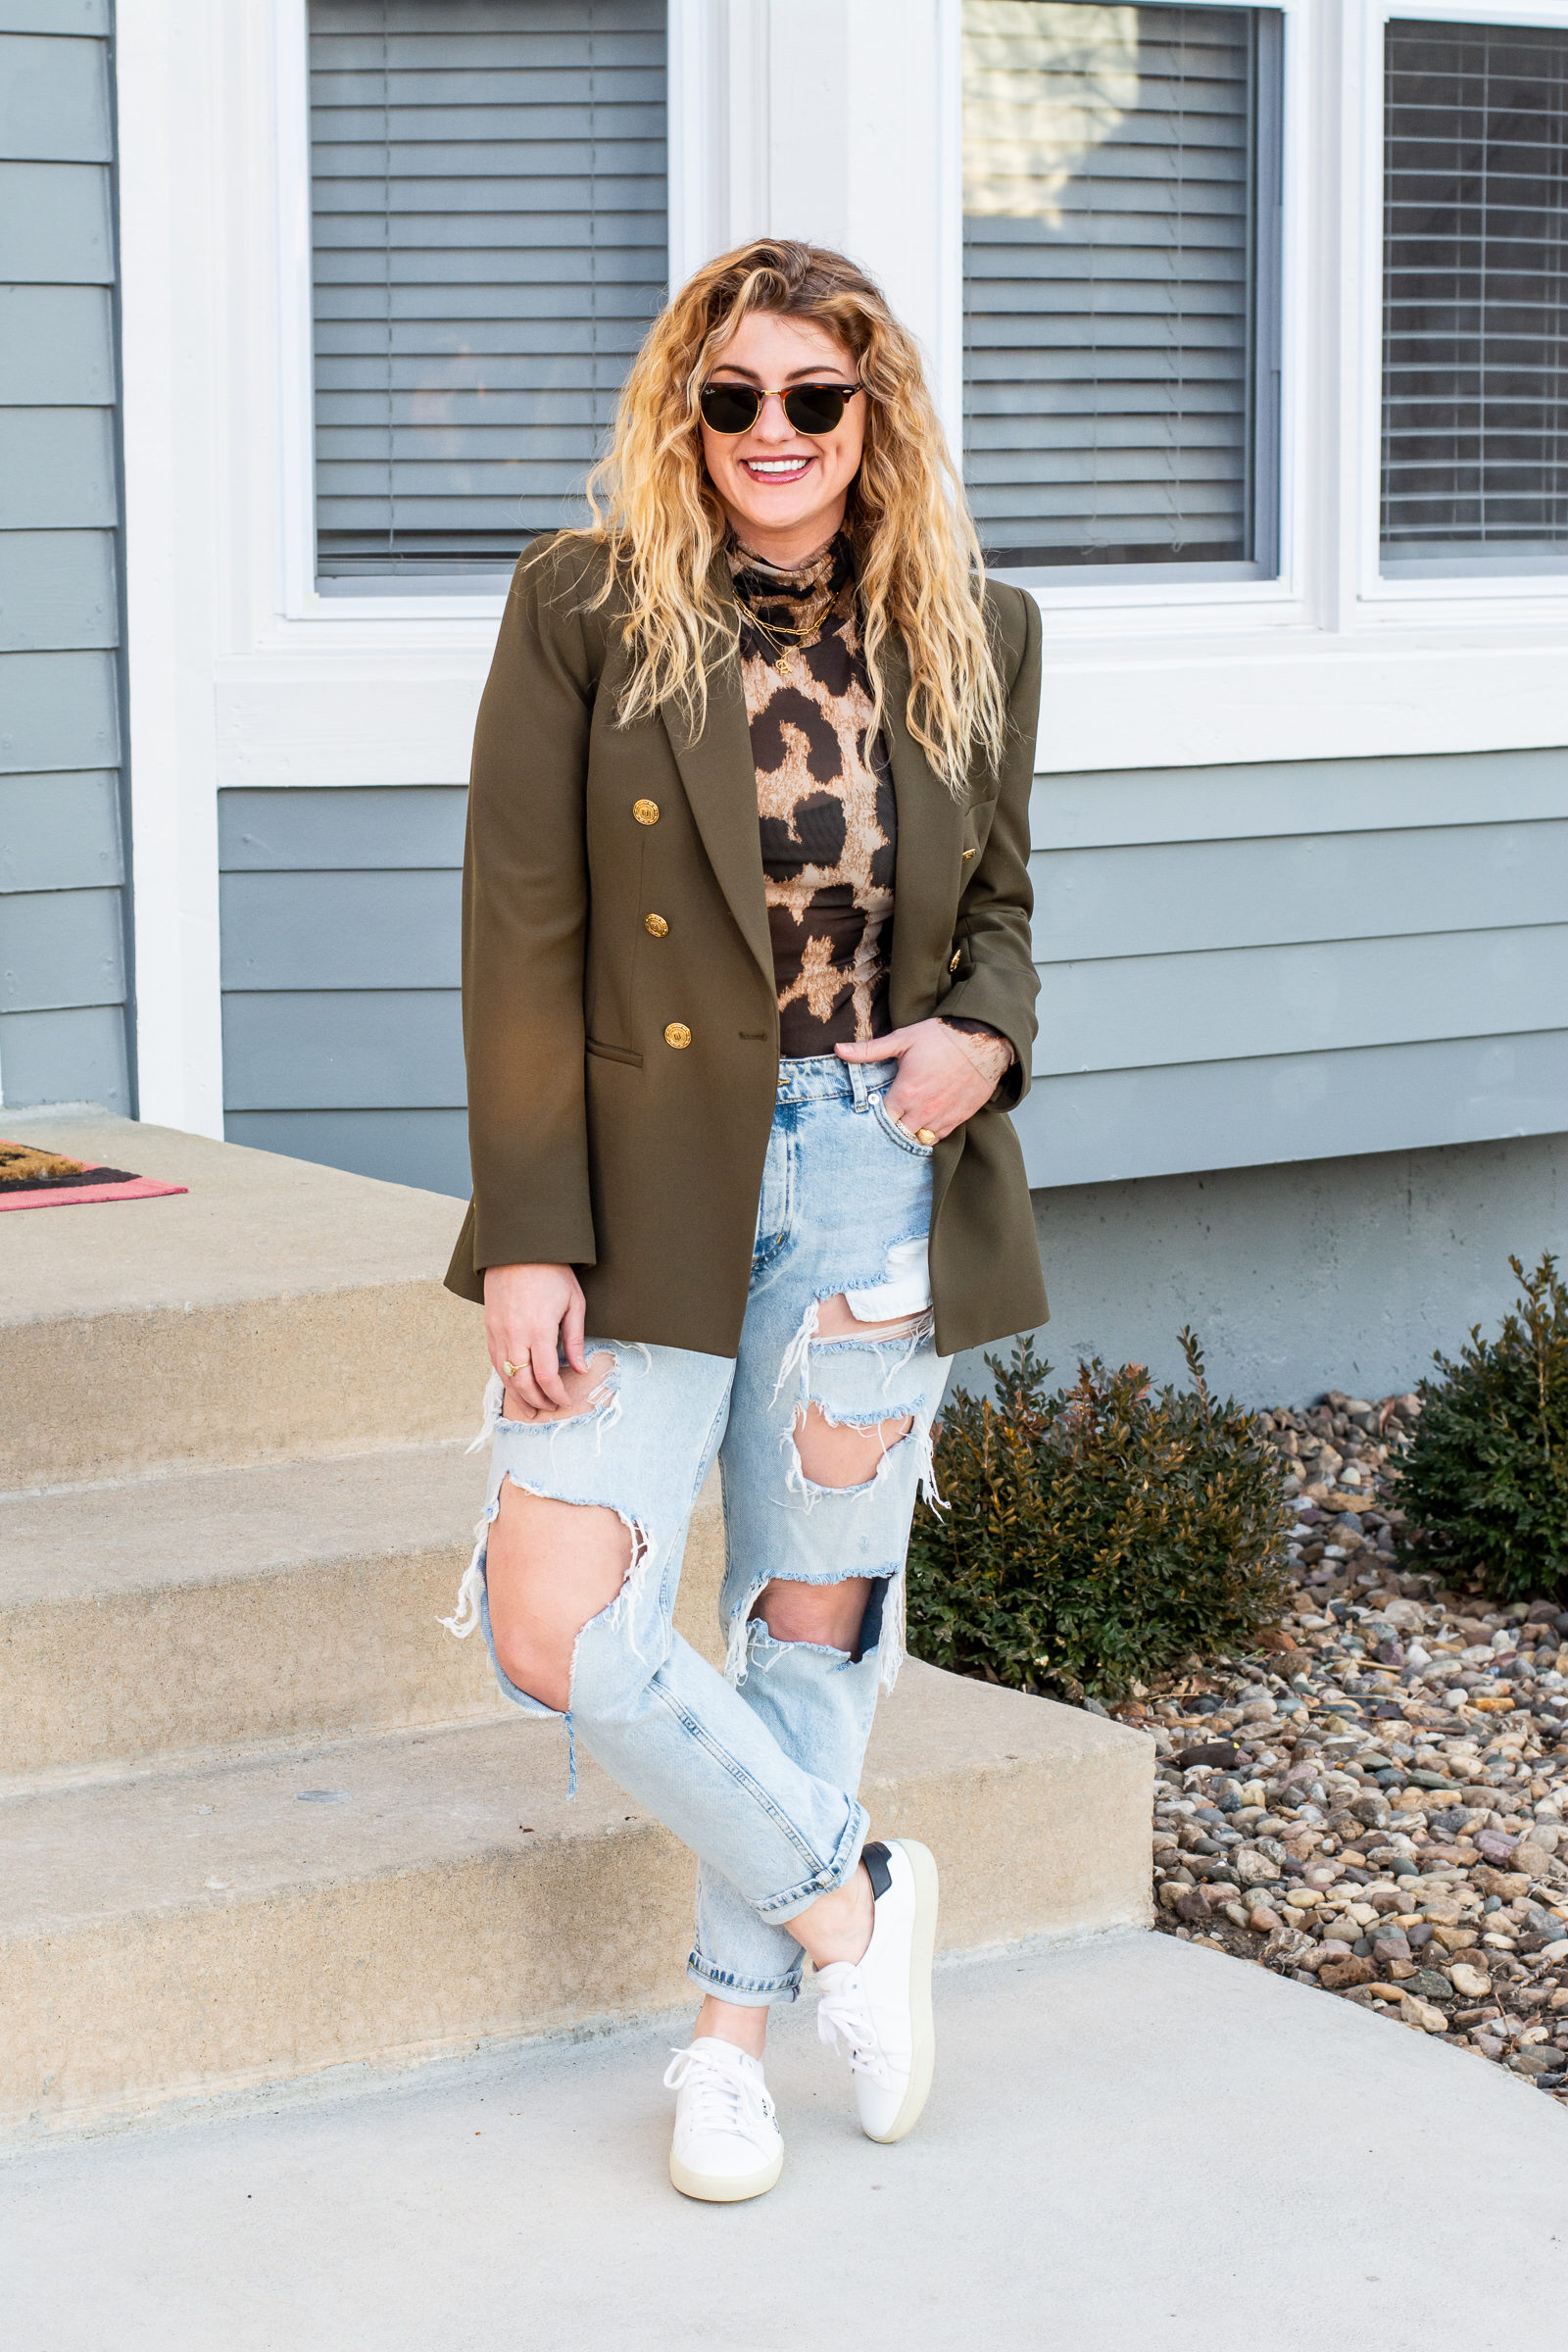 Olive Green Blazer + Ripped Jeans. | LSR